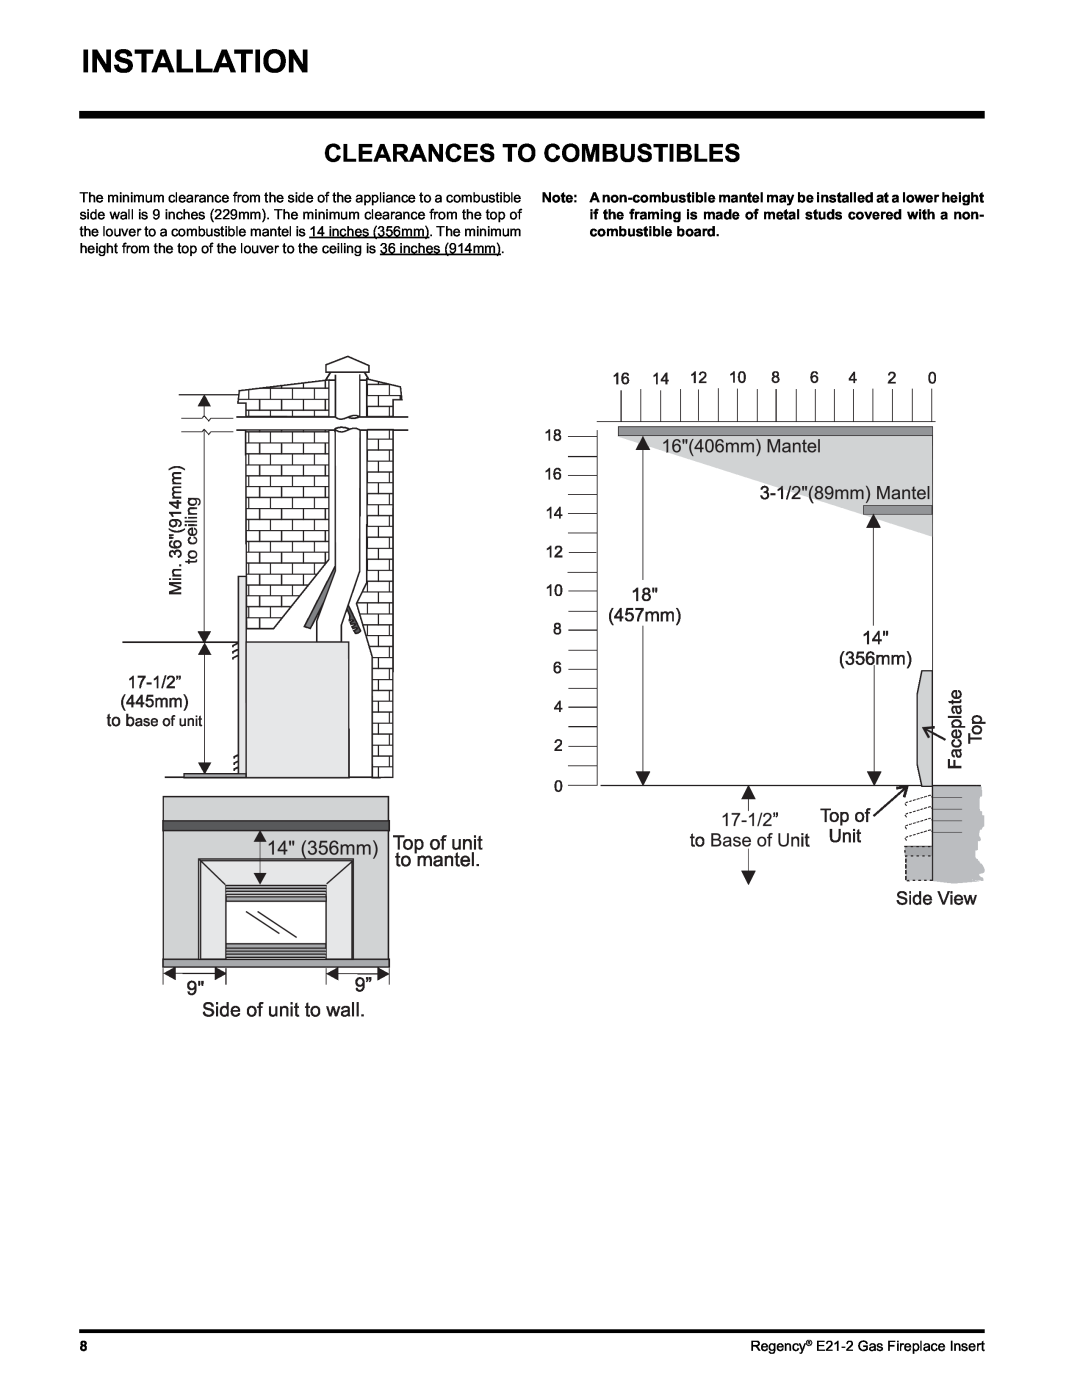 Regency E21-LP2, E21-NG2 installation manual Installation, Clearances To Combustibles, combustible board 